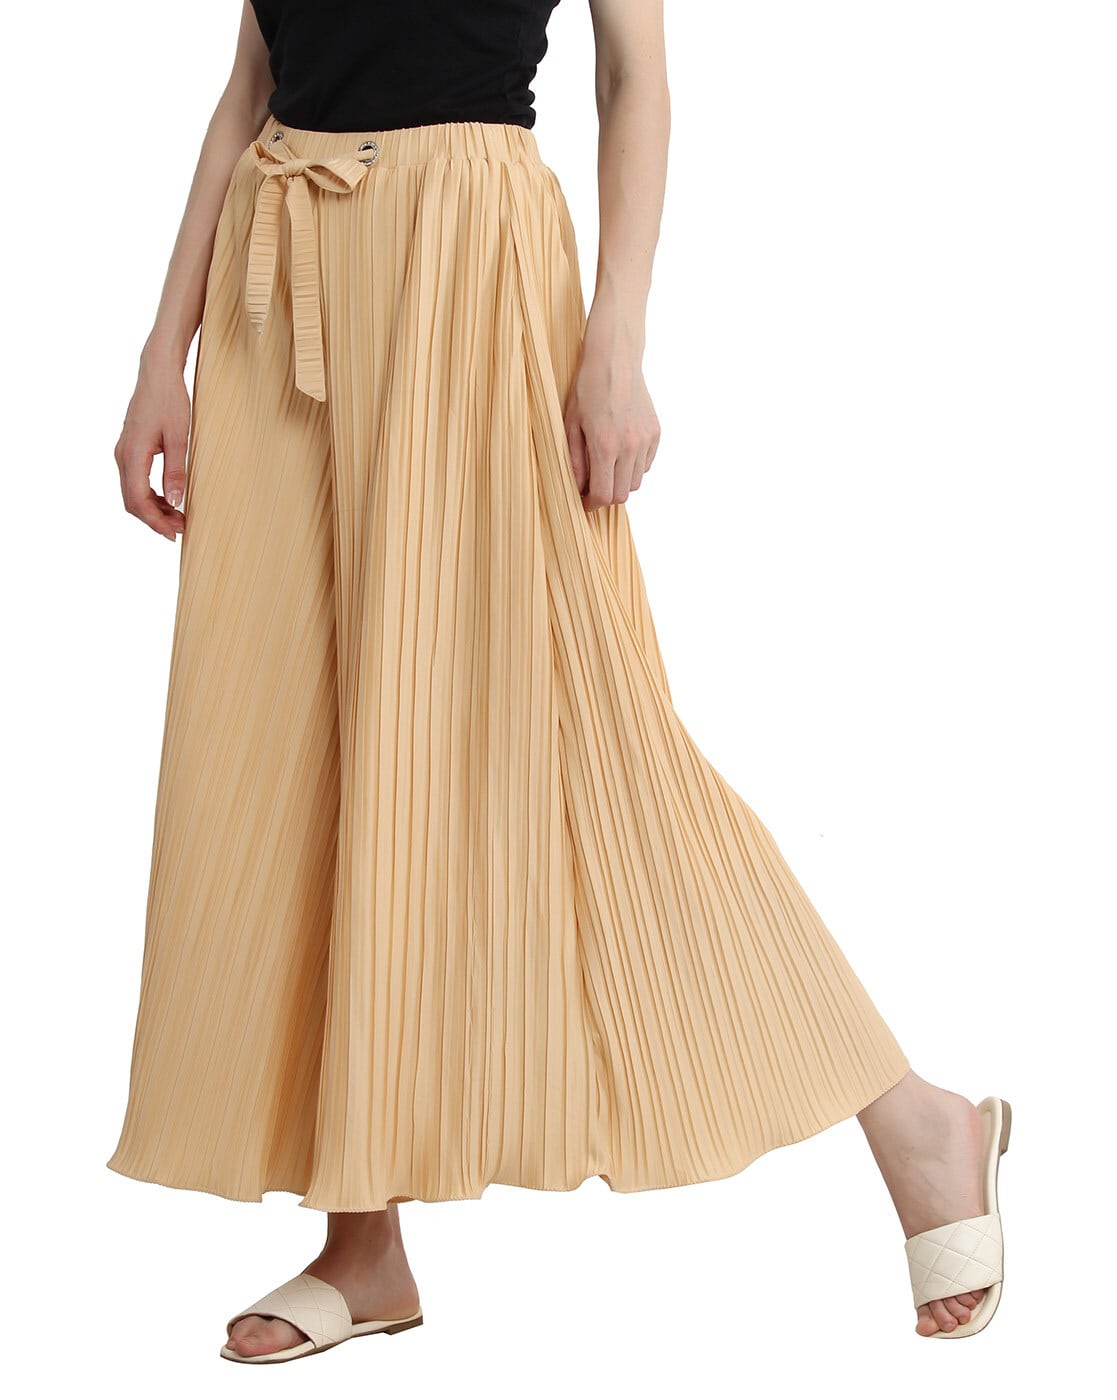 Amazoncom ZSDVBZS Wide Leg Pants for Women Casual Elastic High Waisted Pleated  Palazzo Pants Flowy Chiffon Cropped Trousers Culottes  Sports  Outdoors